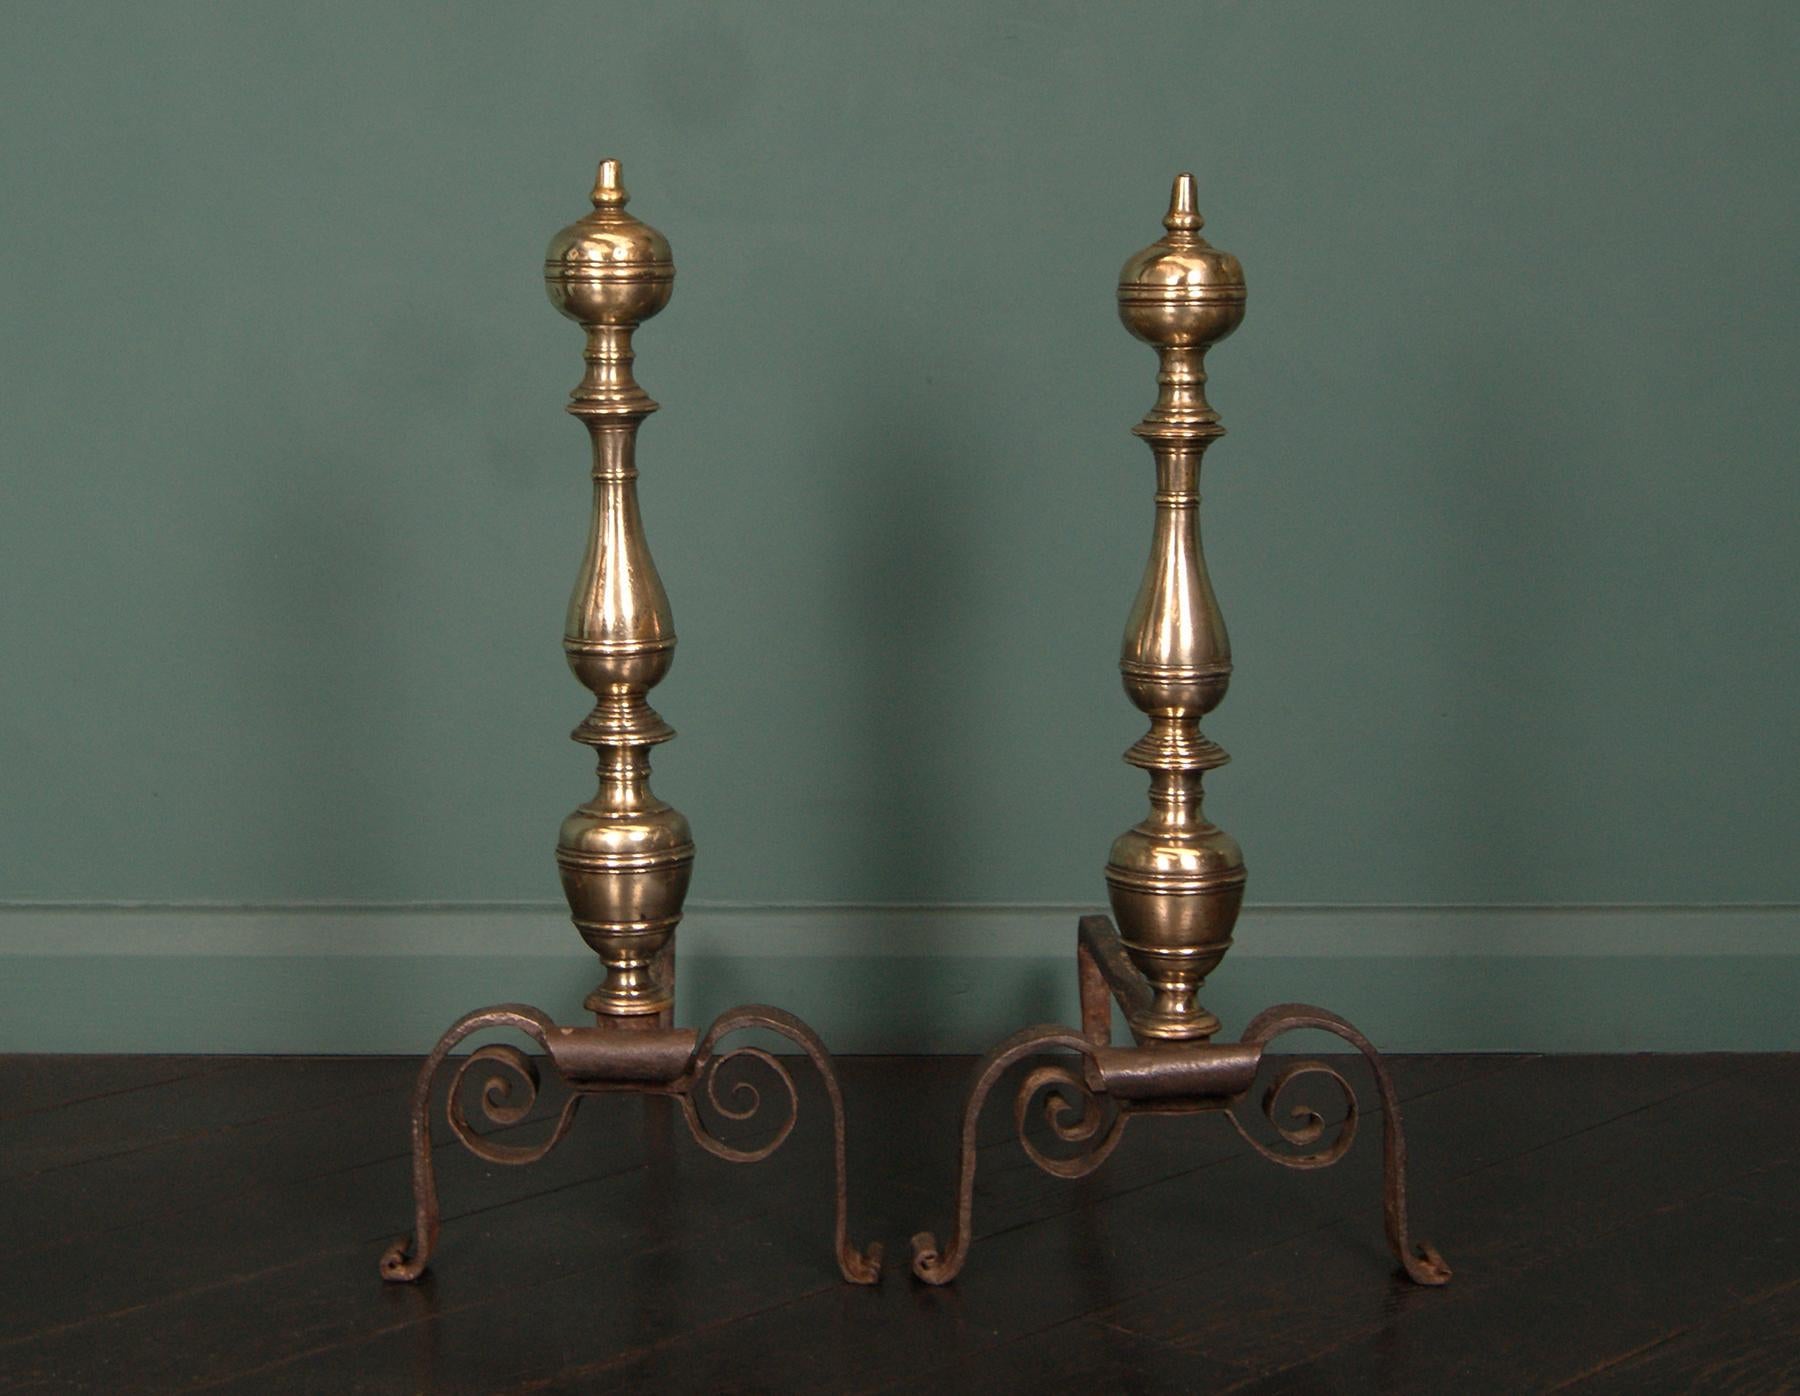 A beautiful pair of 18th century bronze and wrought iron andirons of good Size. The bronze turned standards supported on wrought scrolled arched supports. Log supports at rear.
Circa 1750